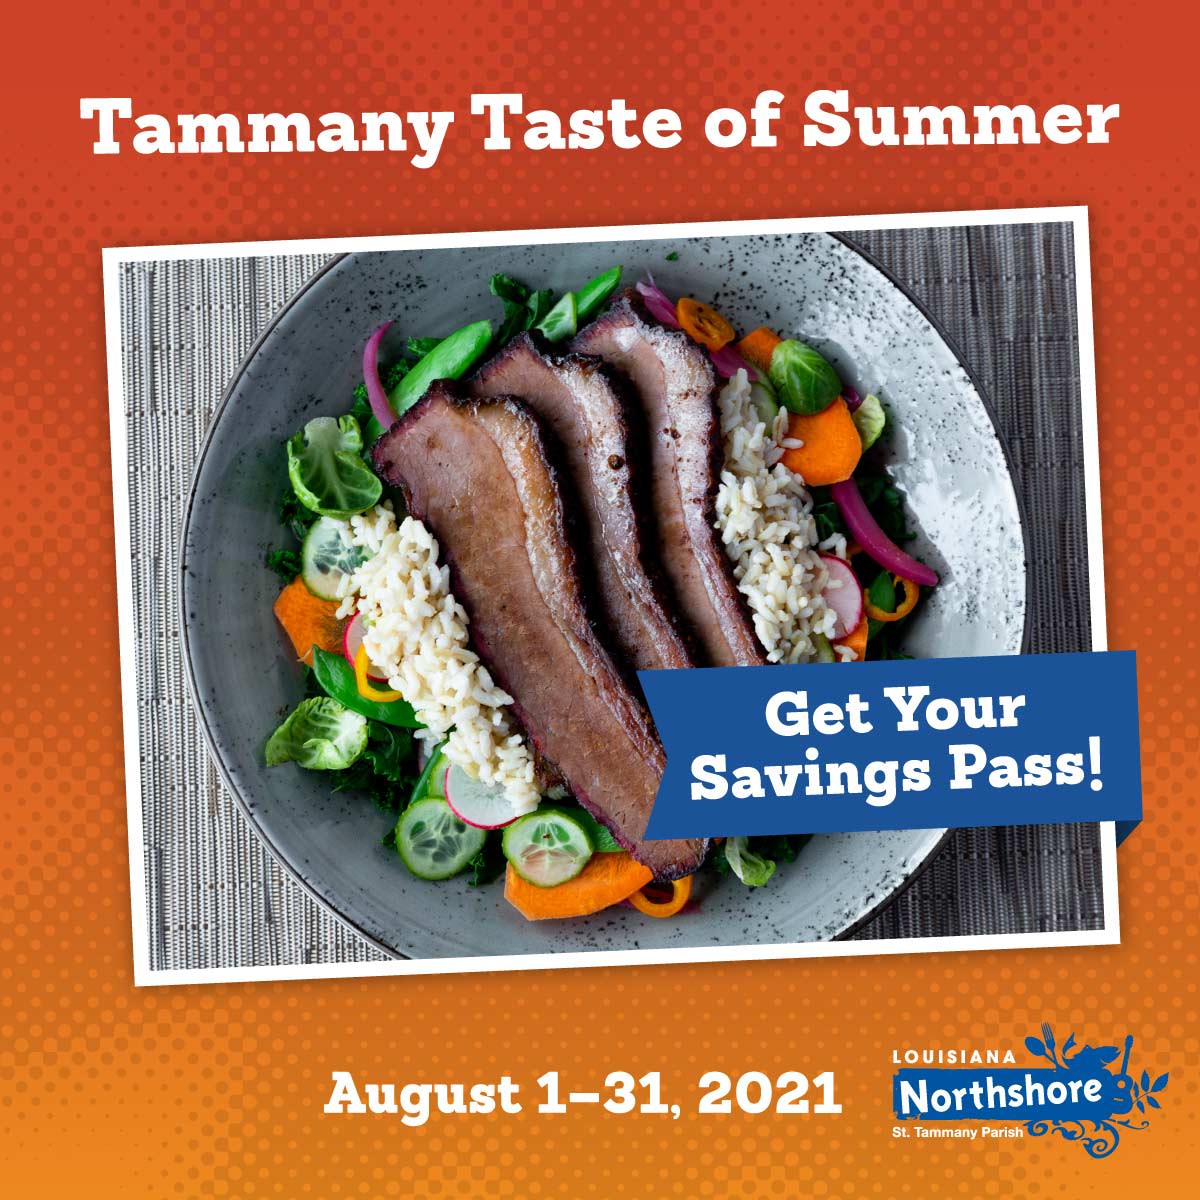 Order Your 2021 Tammany Taste of Summer Savings Pass